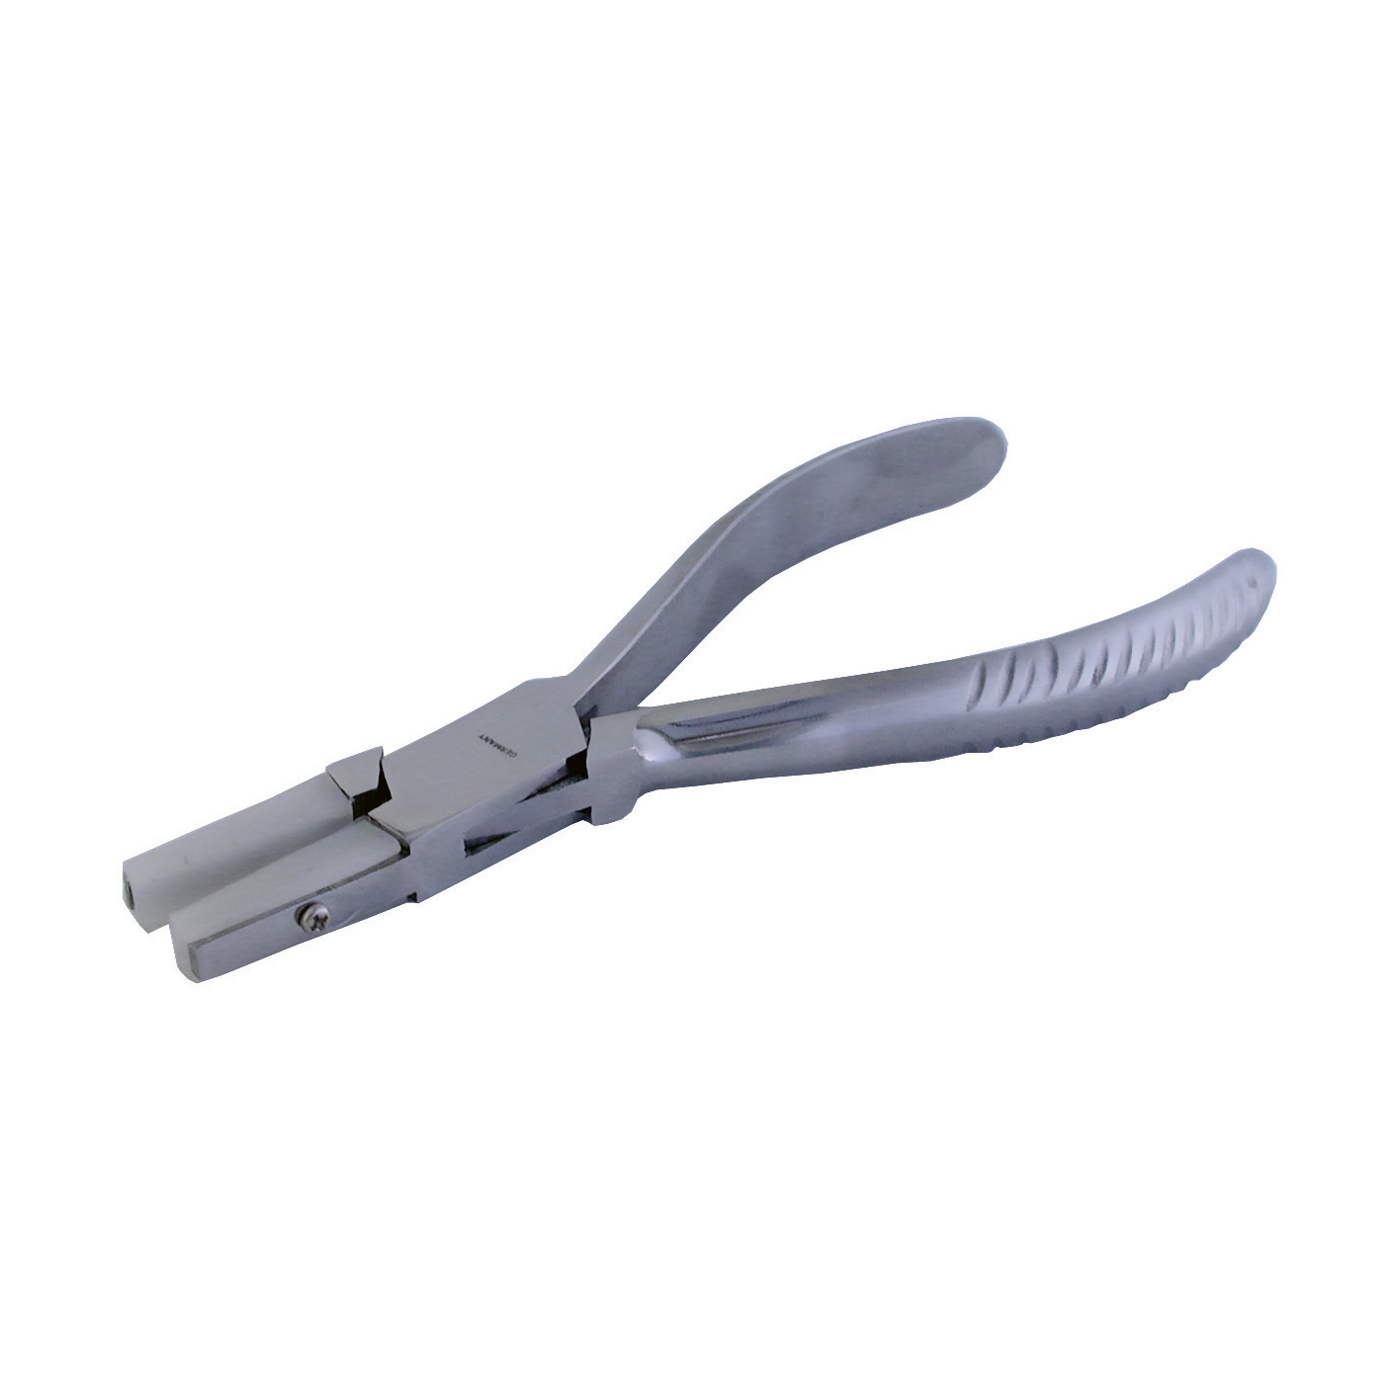 Flat Pliers with Nylon Jaws, 7 mm - 1 piece